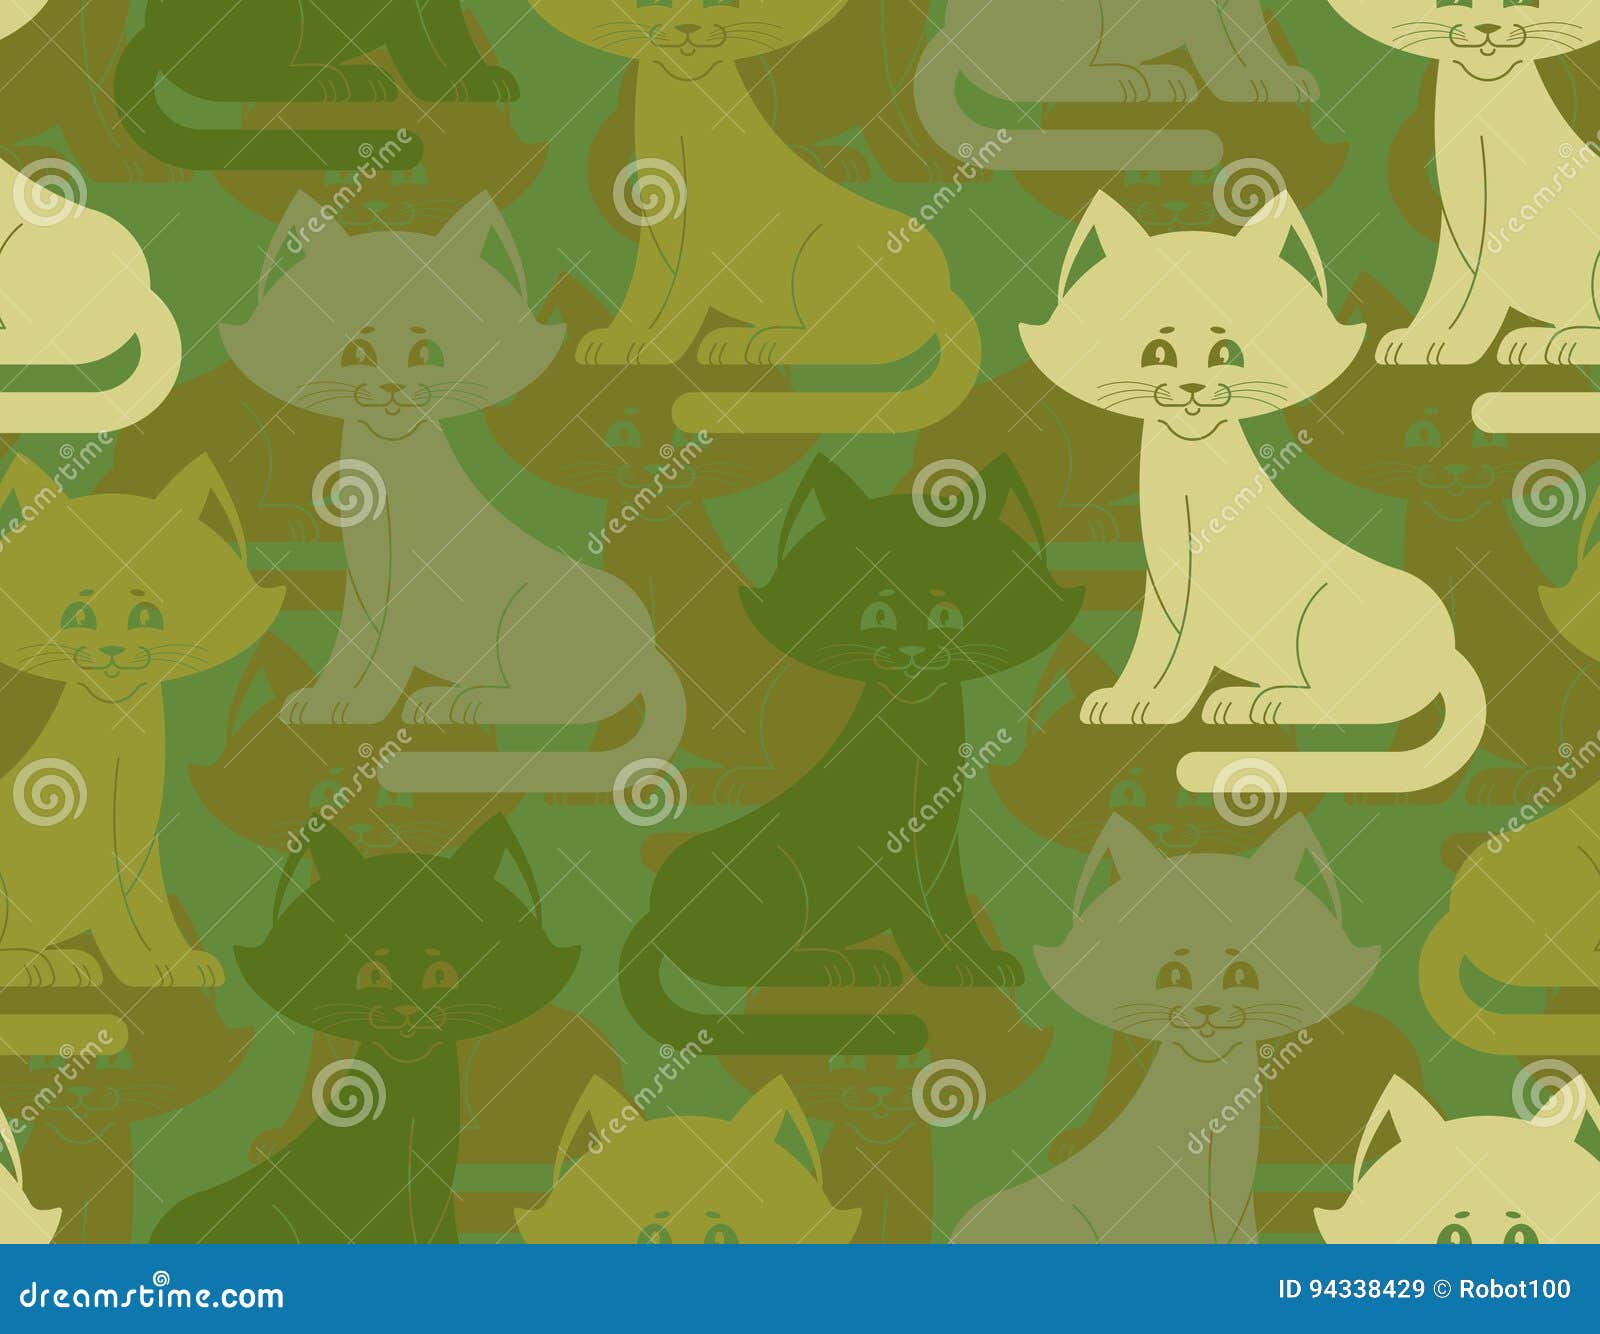 14+ Camouflage Animals Pictures Download Pics